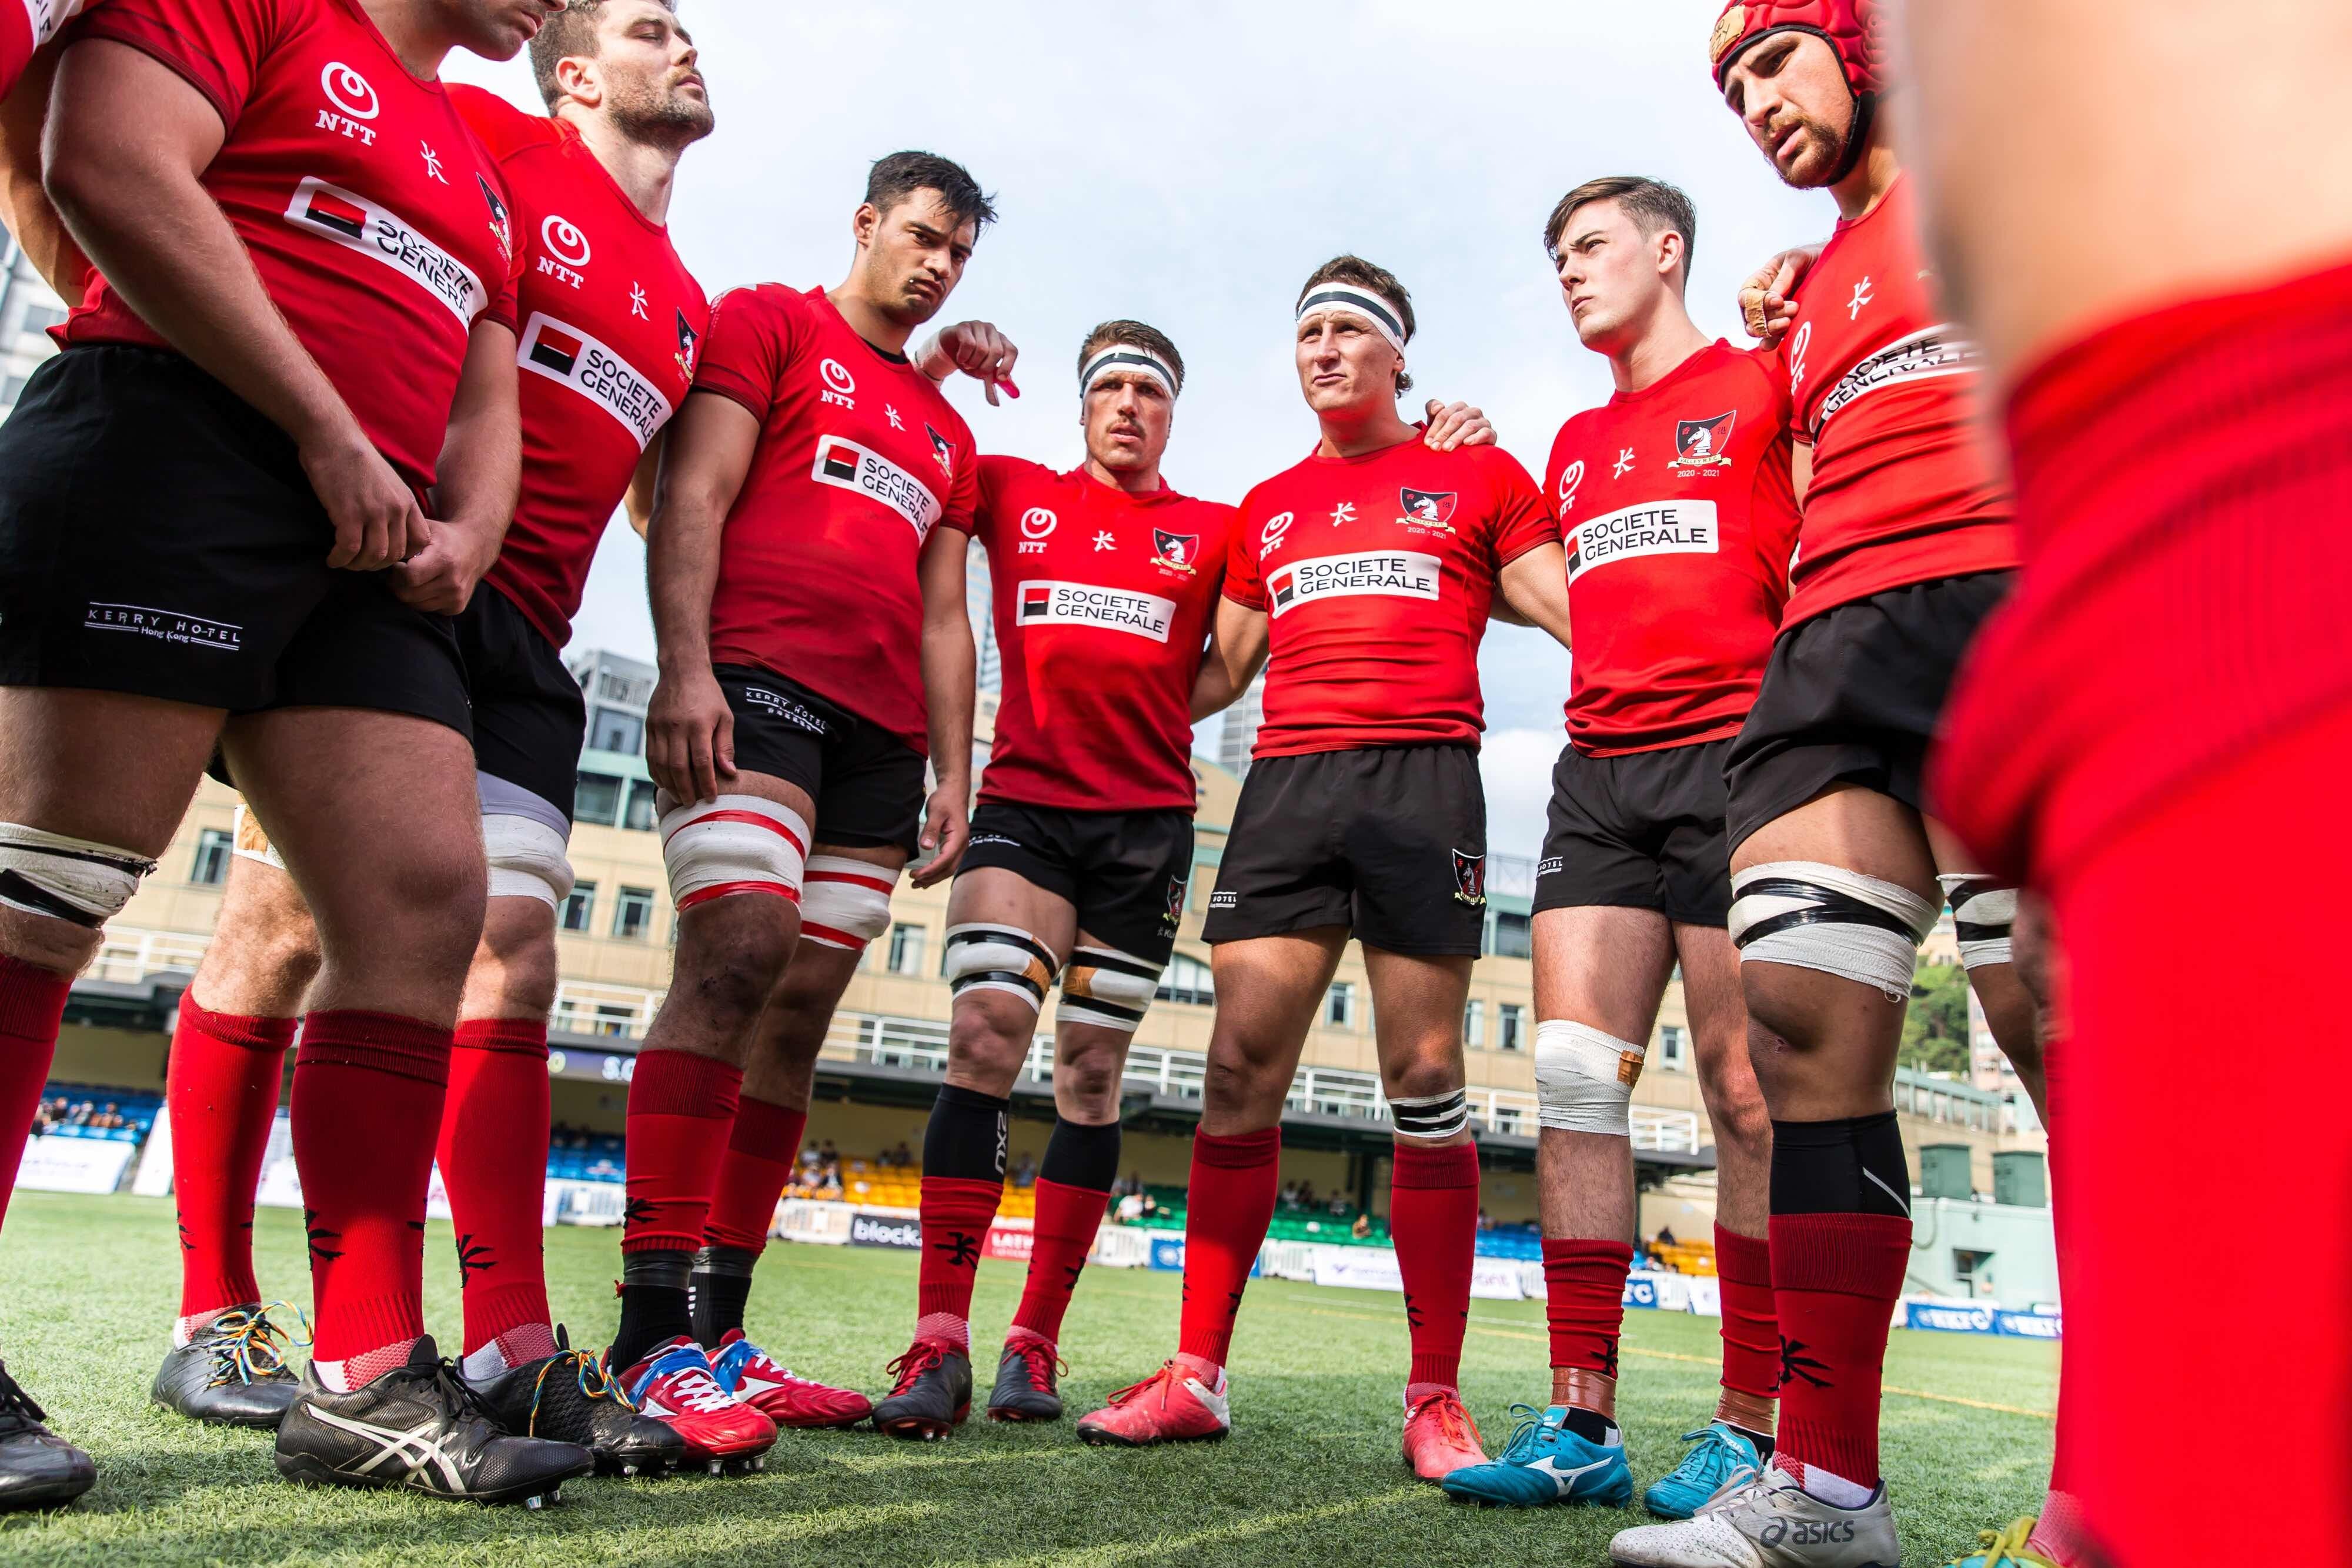 Valley ahead of their first game against Hong Kong Football Club in the men‘s Premiership 2021-22 season. Photo: Hong Kong Rugby Union